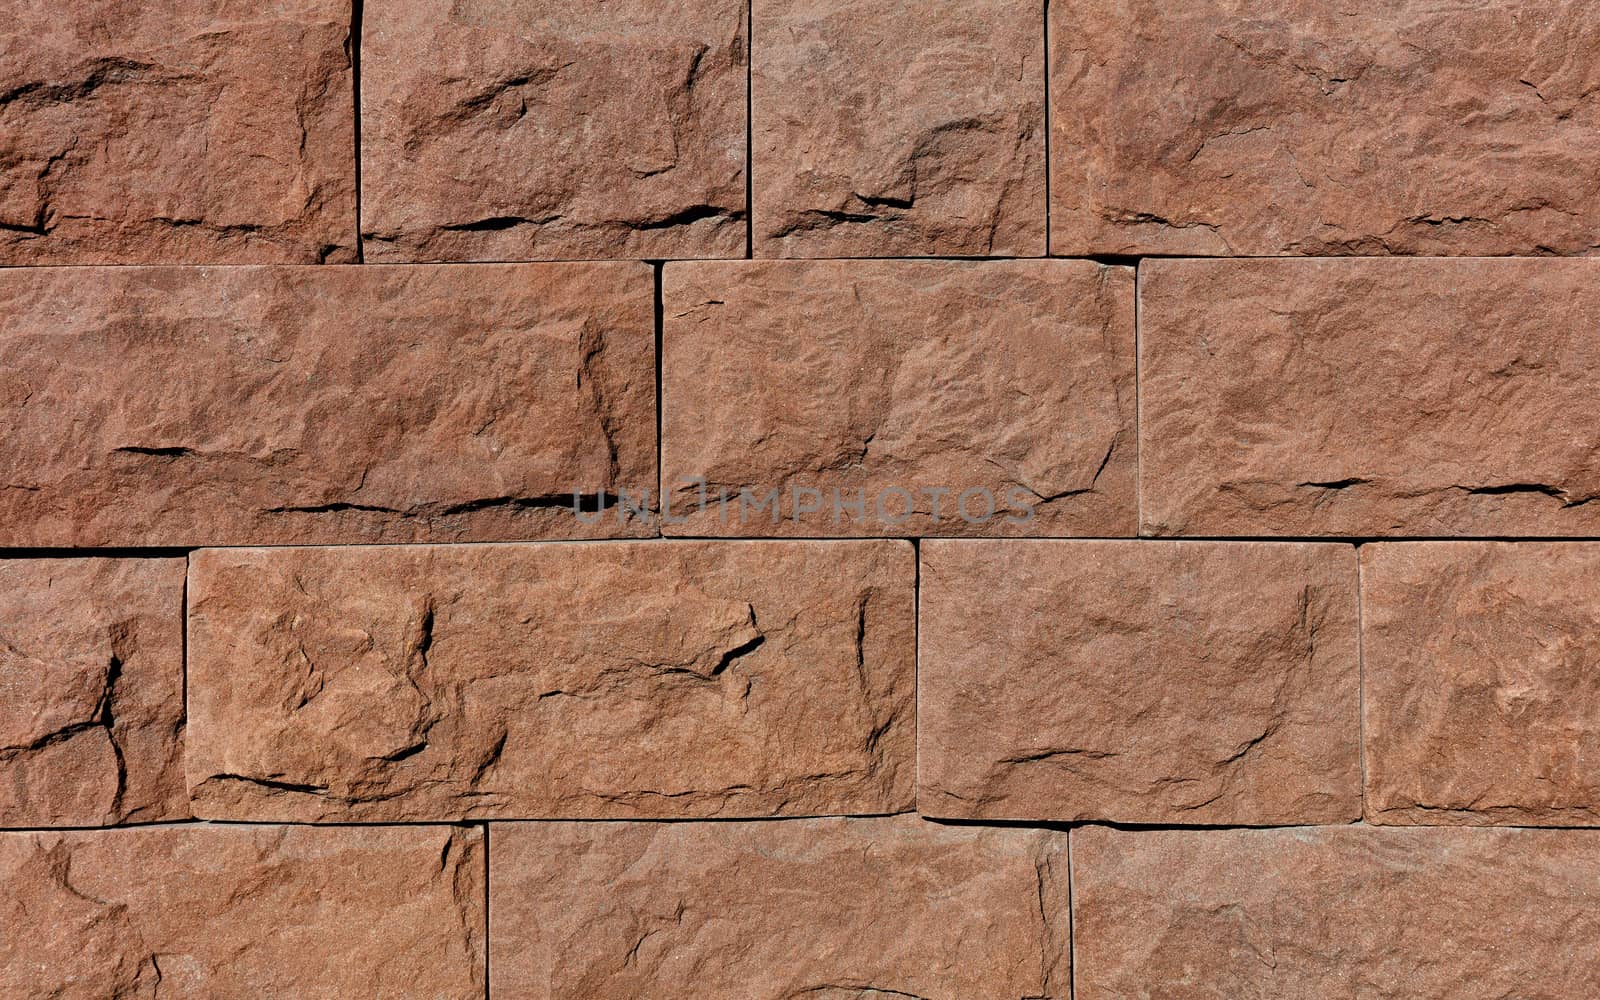 The wall is tiled with brown granite tiles, each chipped around the perimeter. by Sergii